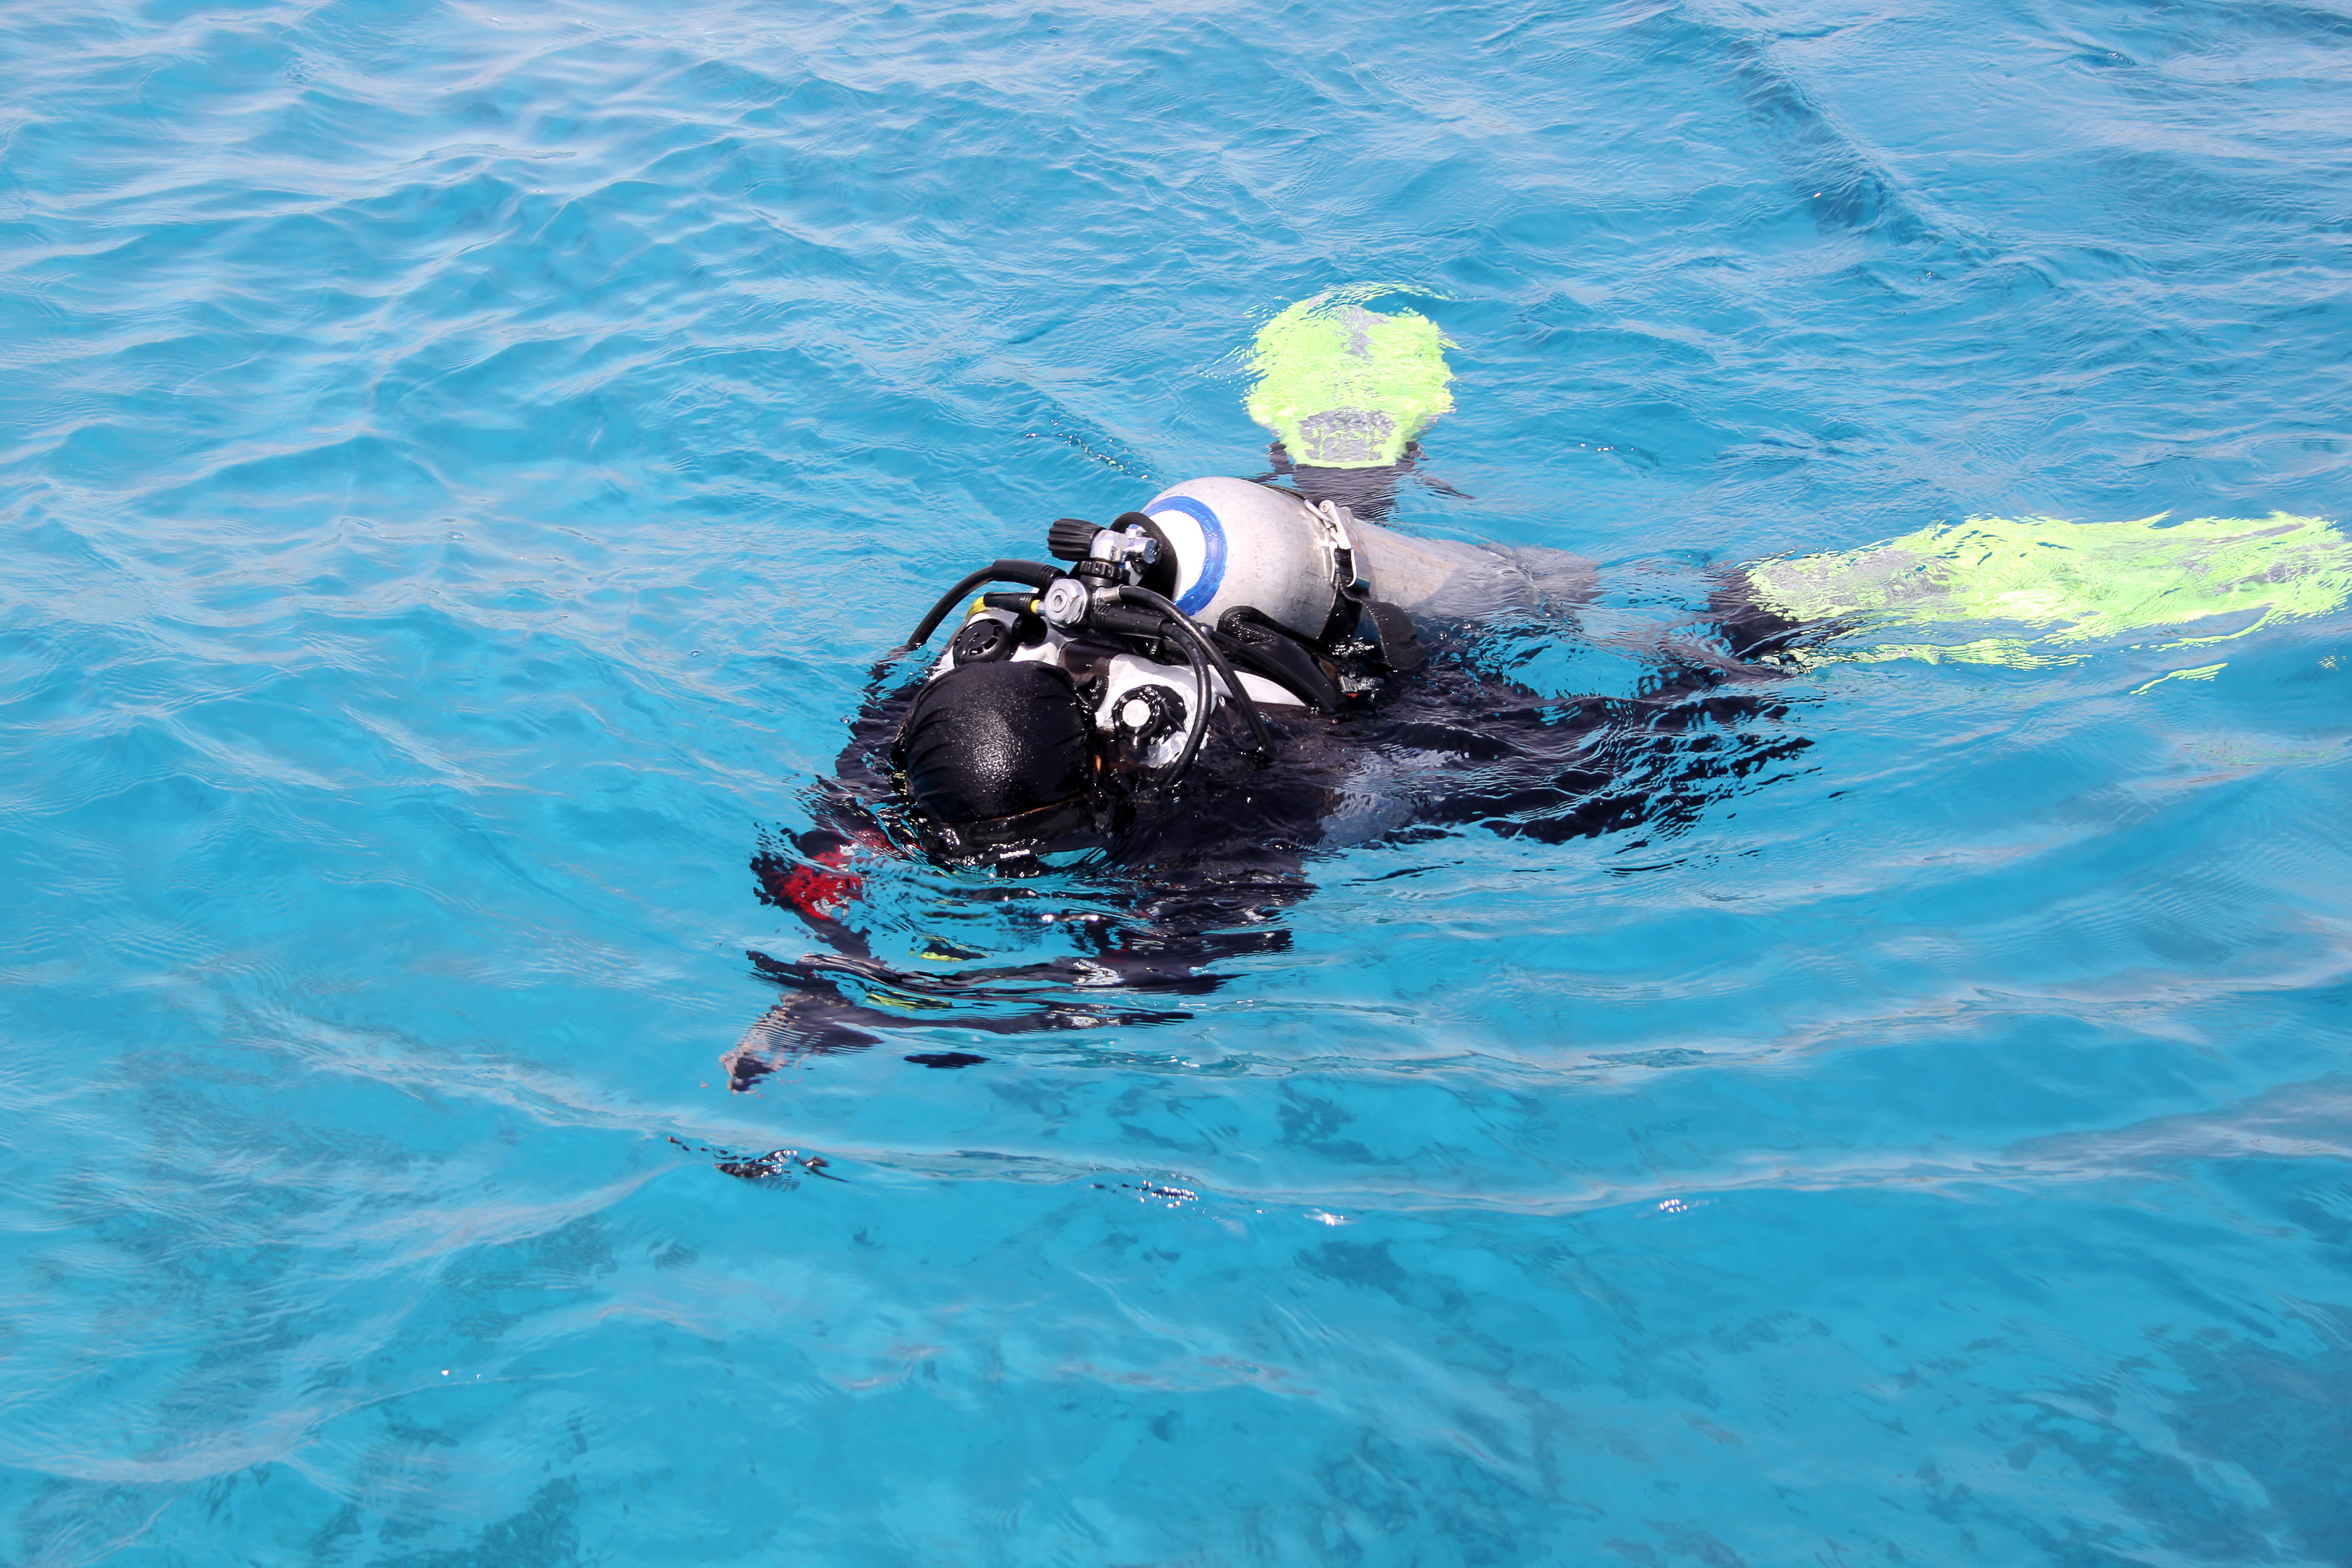 Scuba diver floating on the surface of the water face down before being rescued by a nearby diver